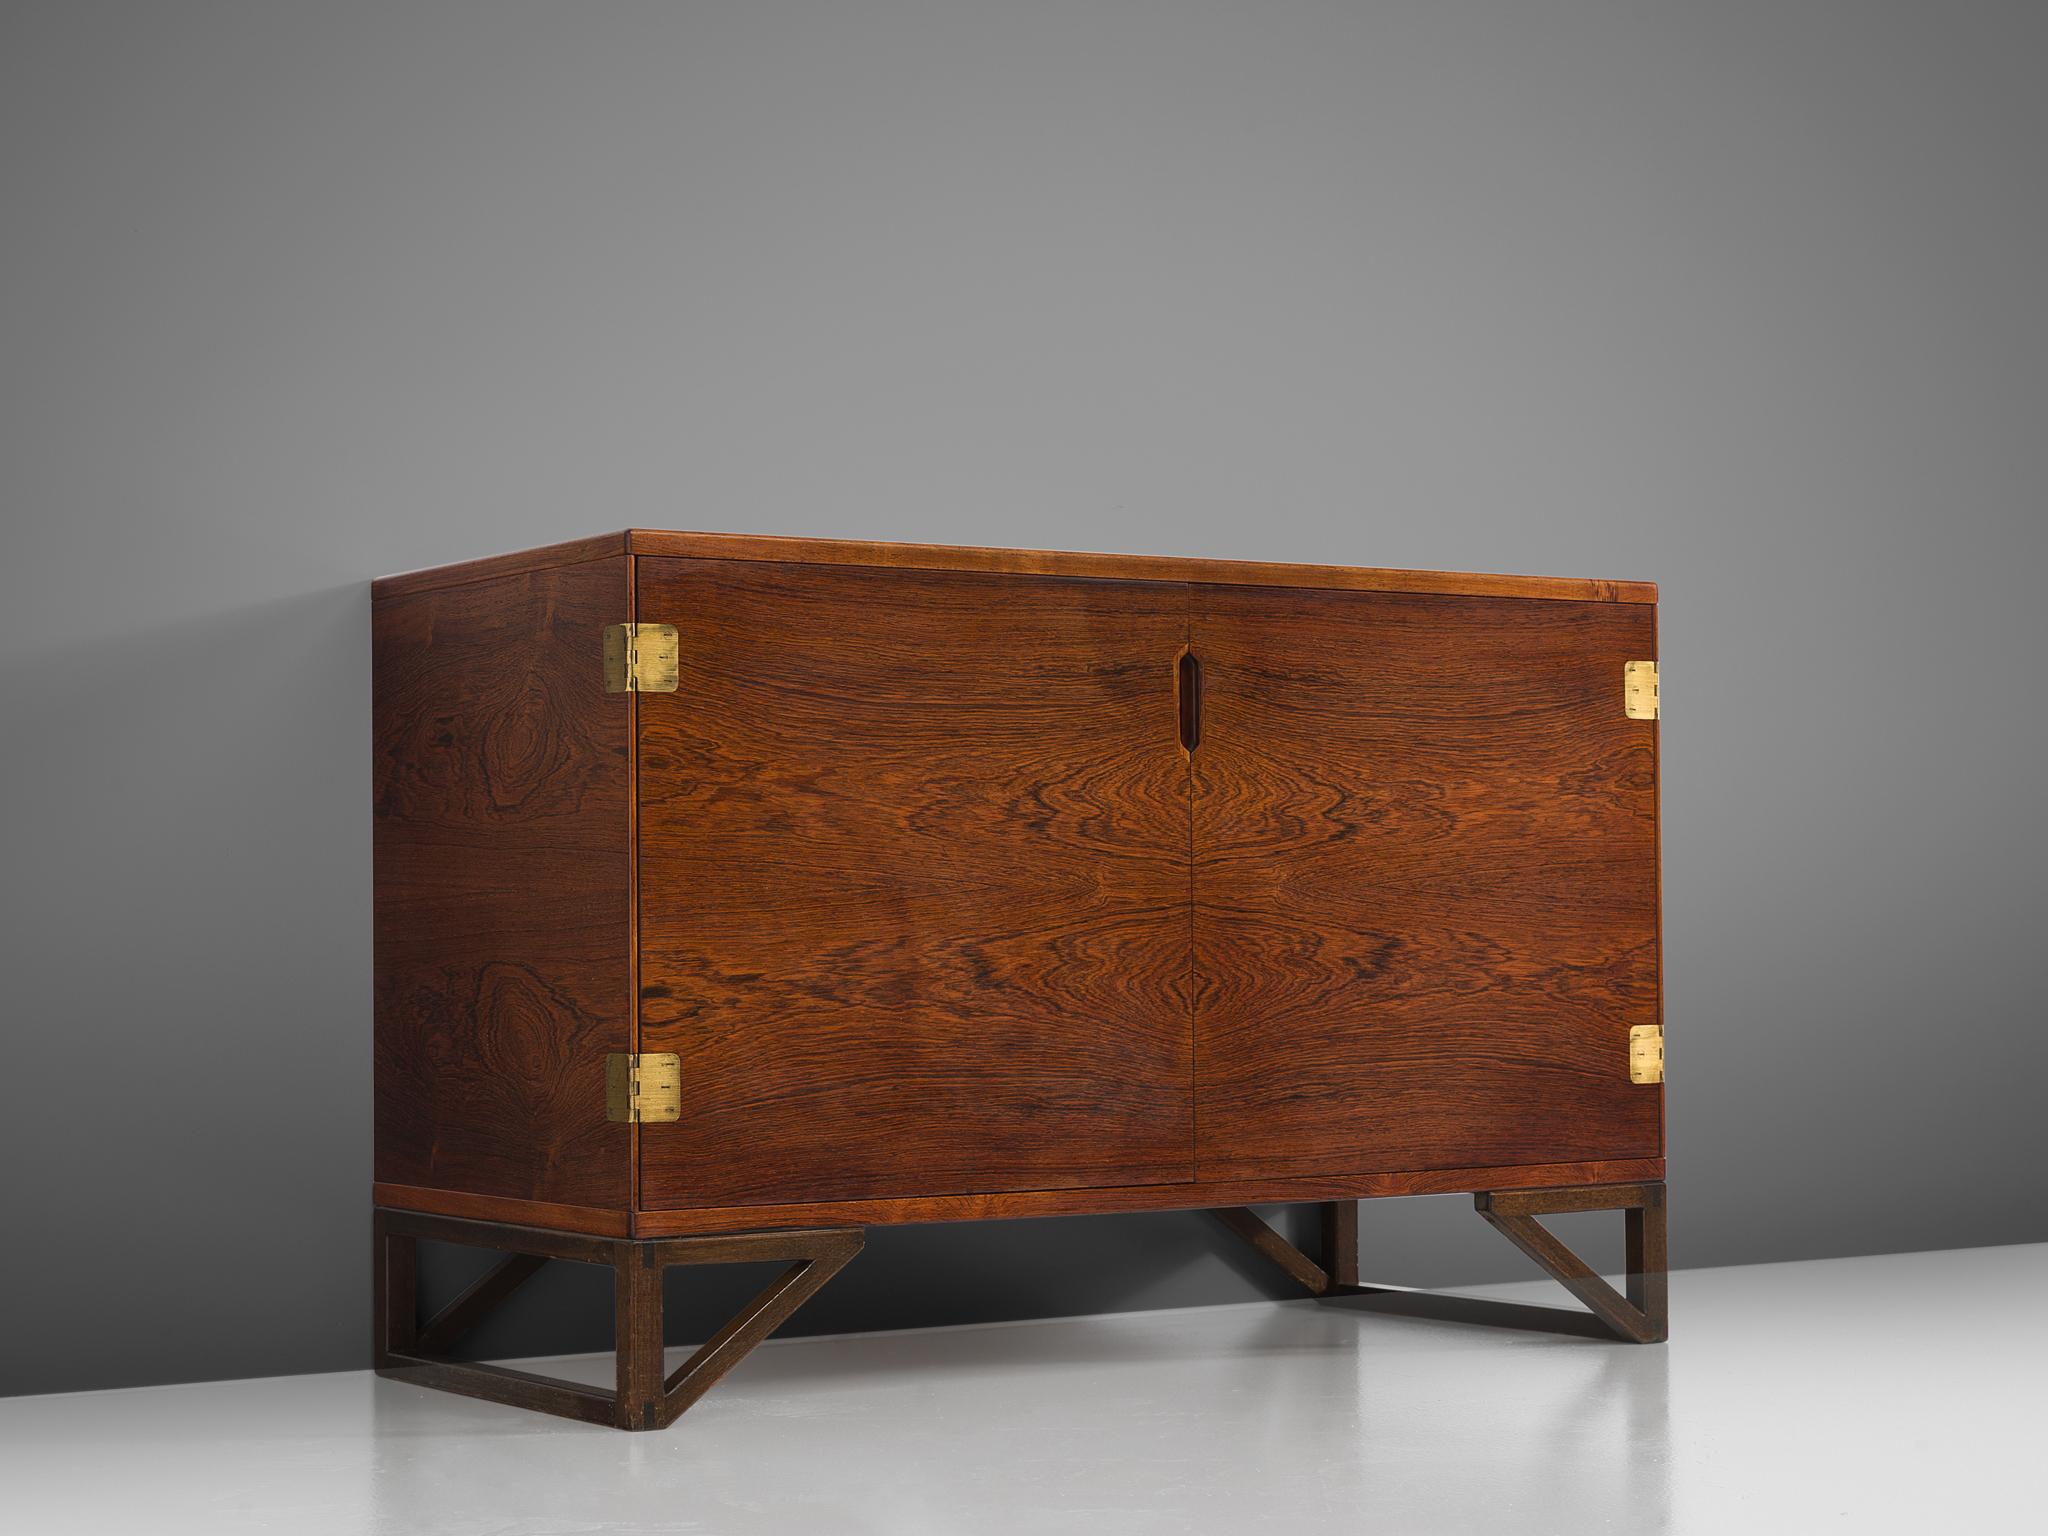 Svend Langkilde for Lankilde Møbler, cabinet, rosewood and brass, Denmark, 1950s. 

Modest and refined rosewood cabinet designed by Svend Langkilde, produced by Langkilde Møbler. This sideboard is equipped with Langekilde's signature graphic door